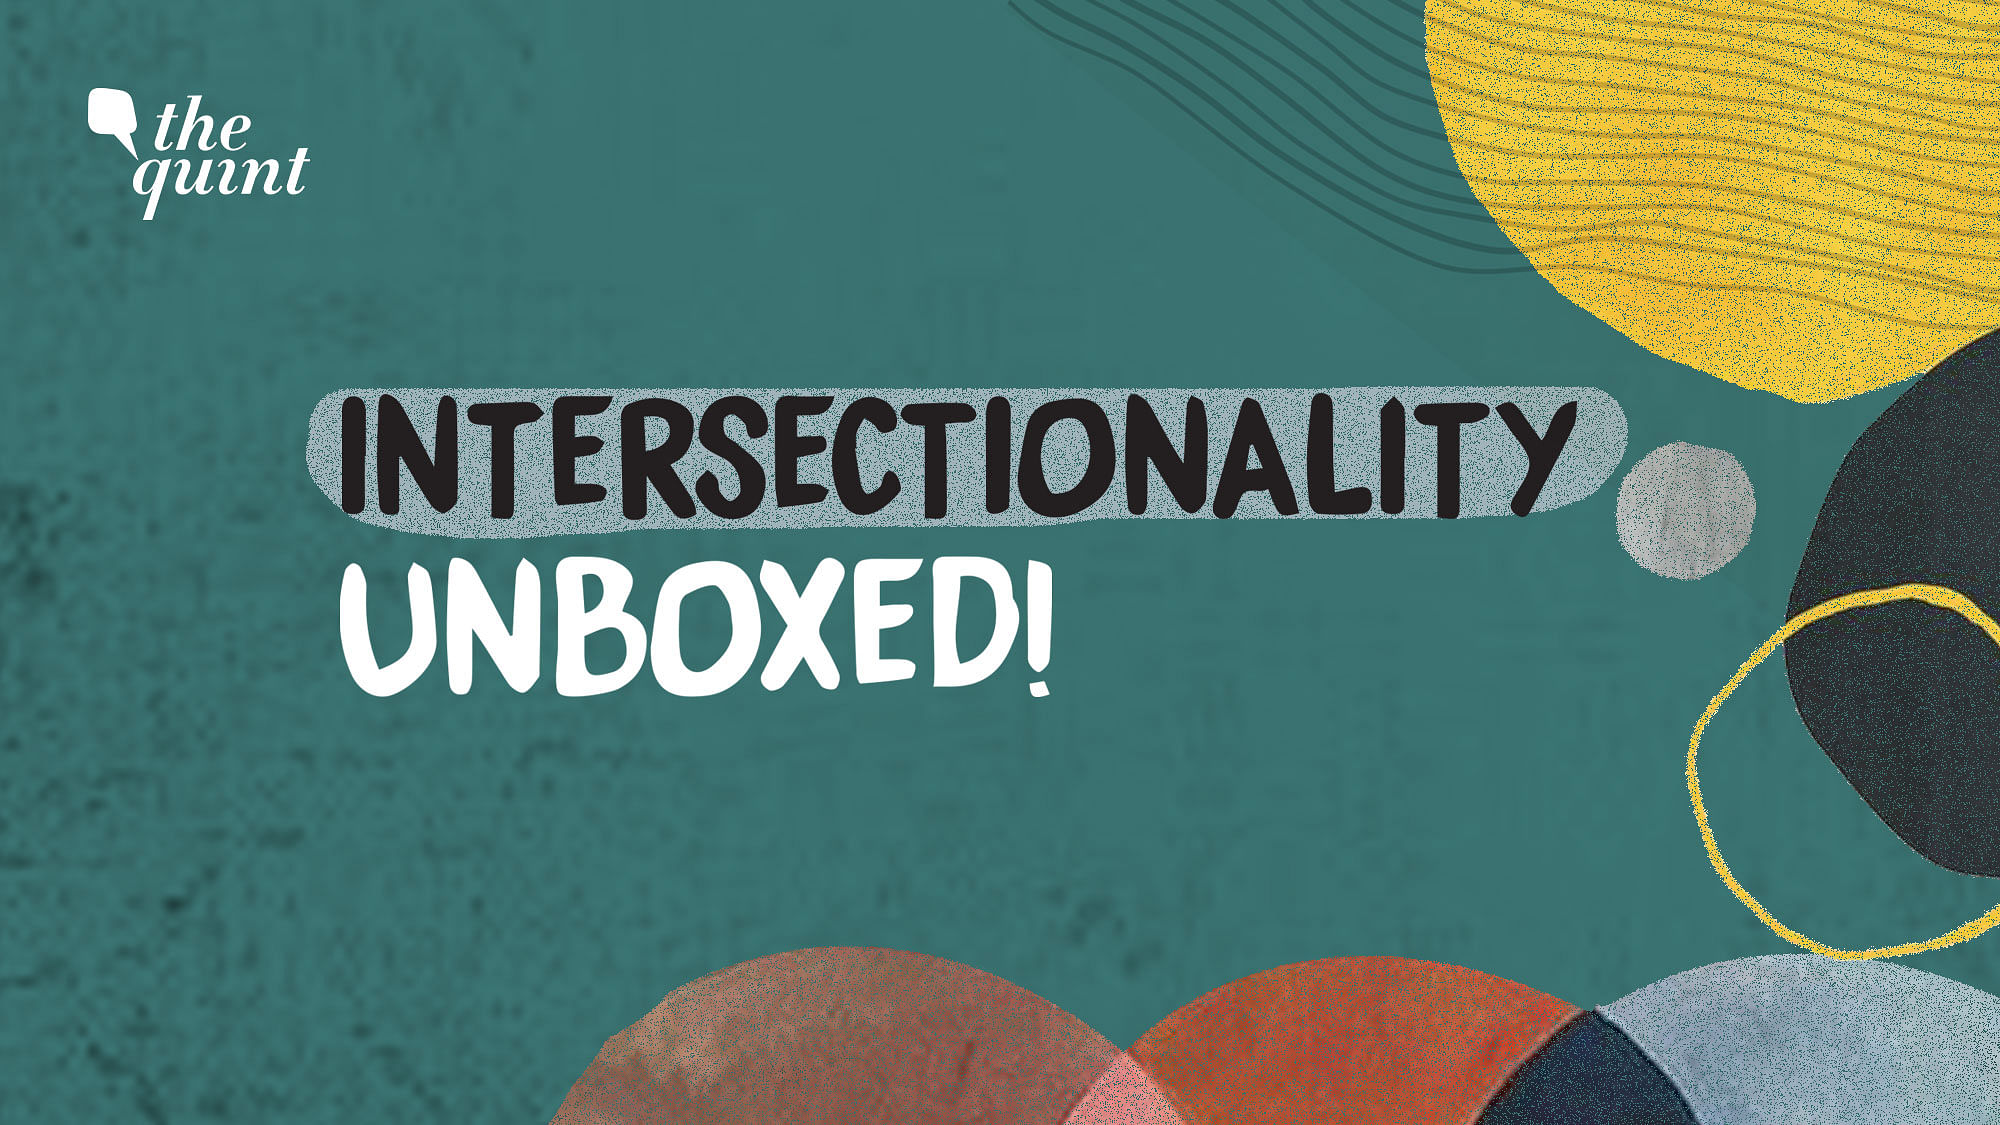 All you need to know about intersectionality.